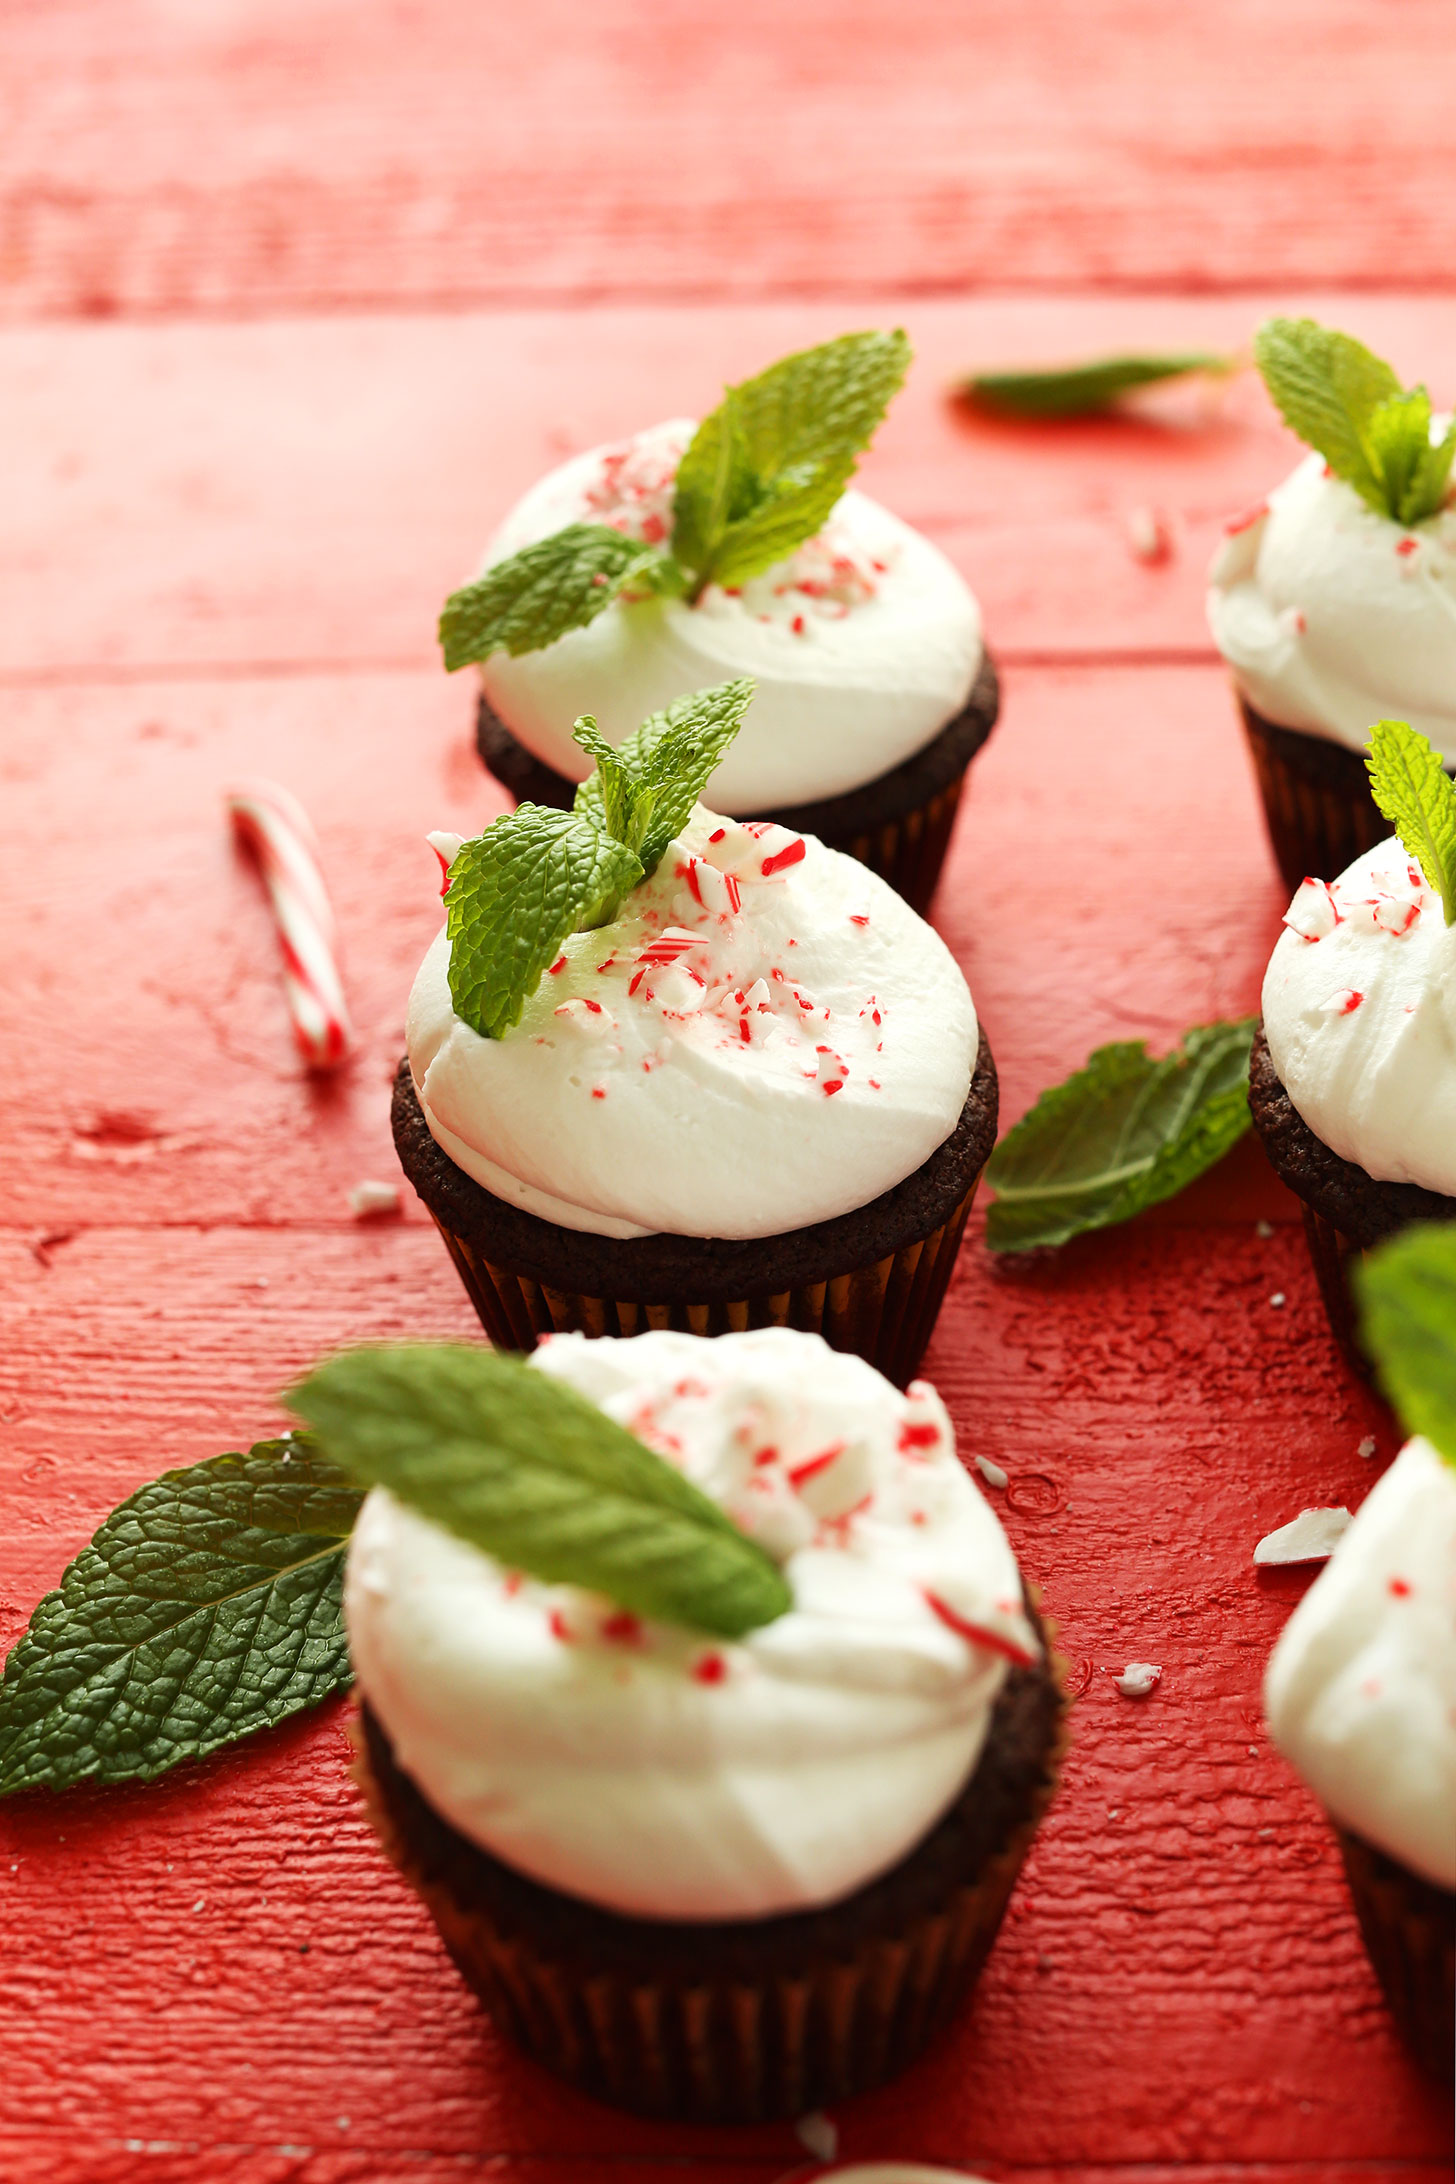 Homemade gluten-free vegan Chocolate Peppermint Cupcakes on a festive red background